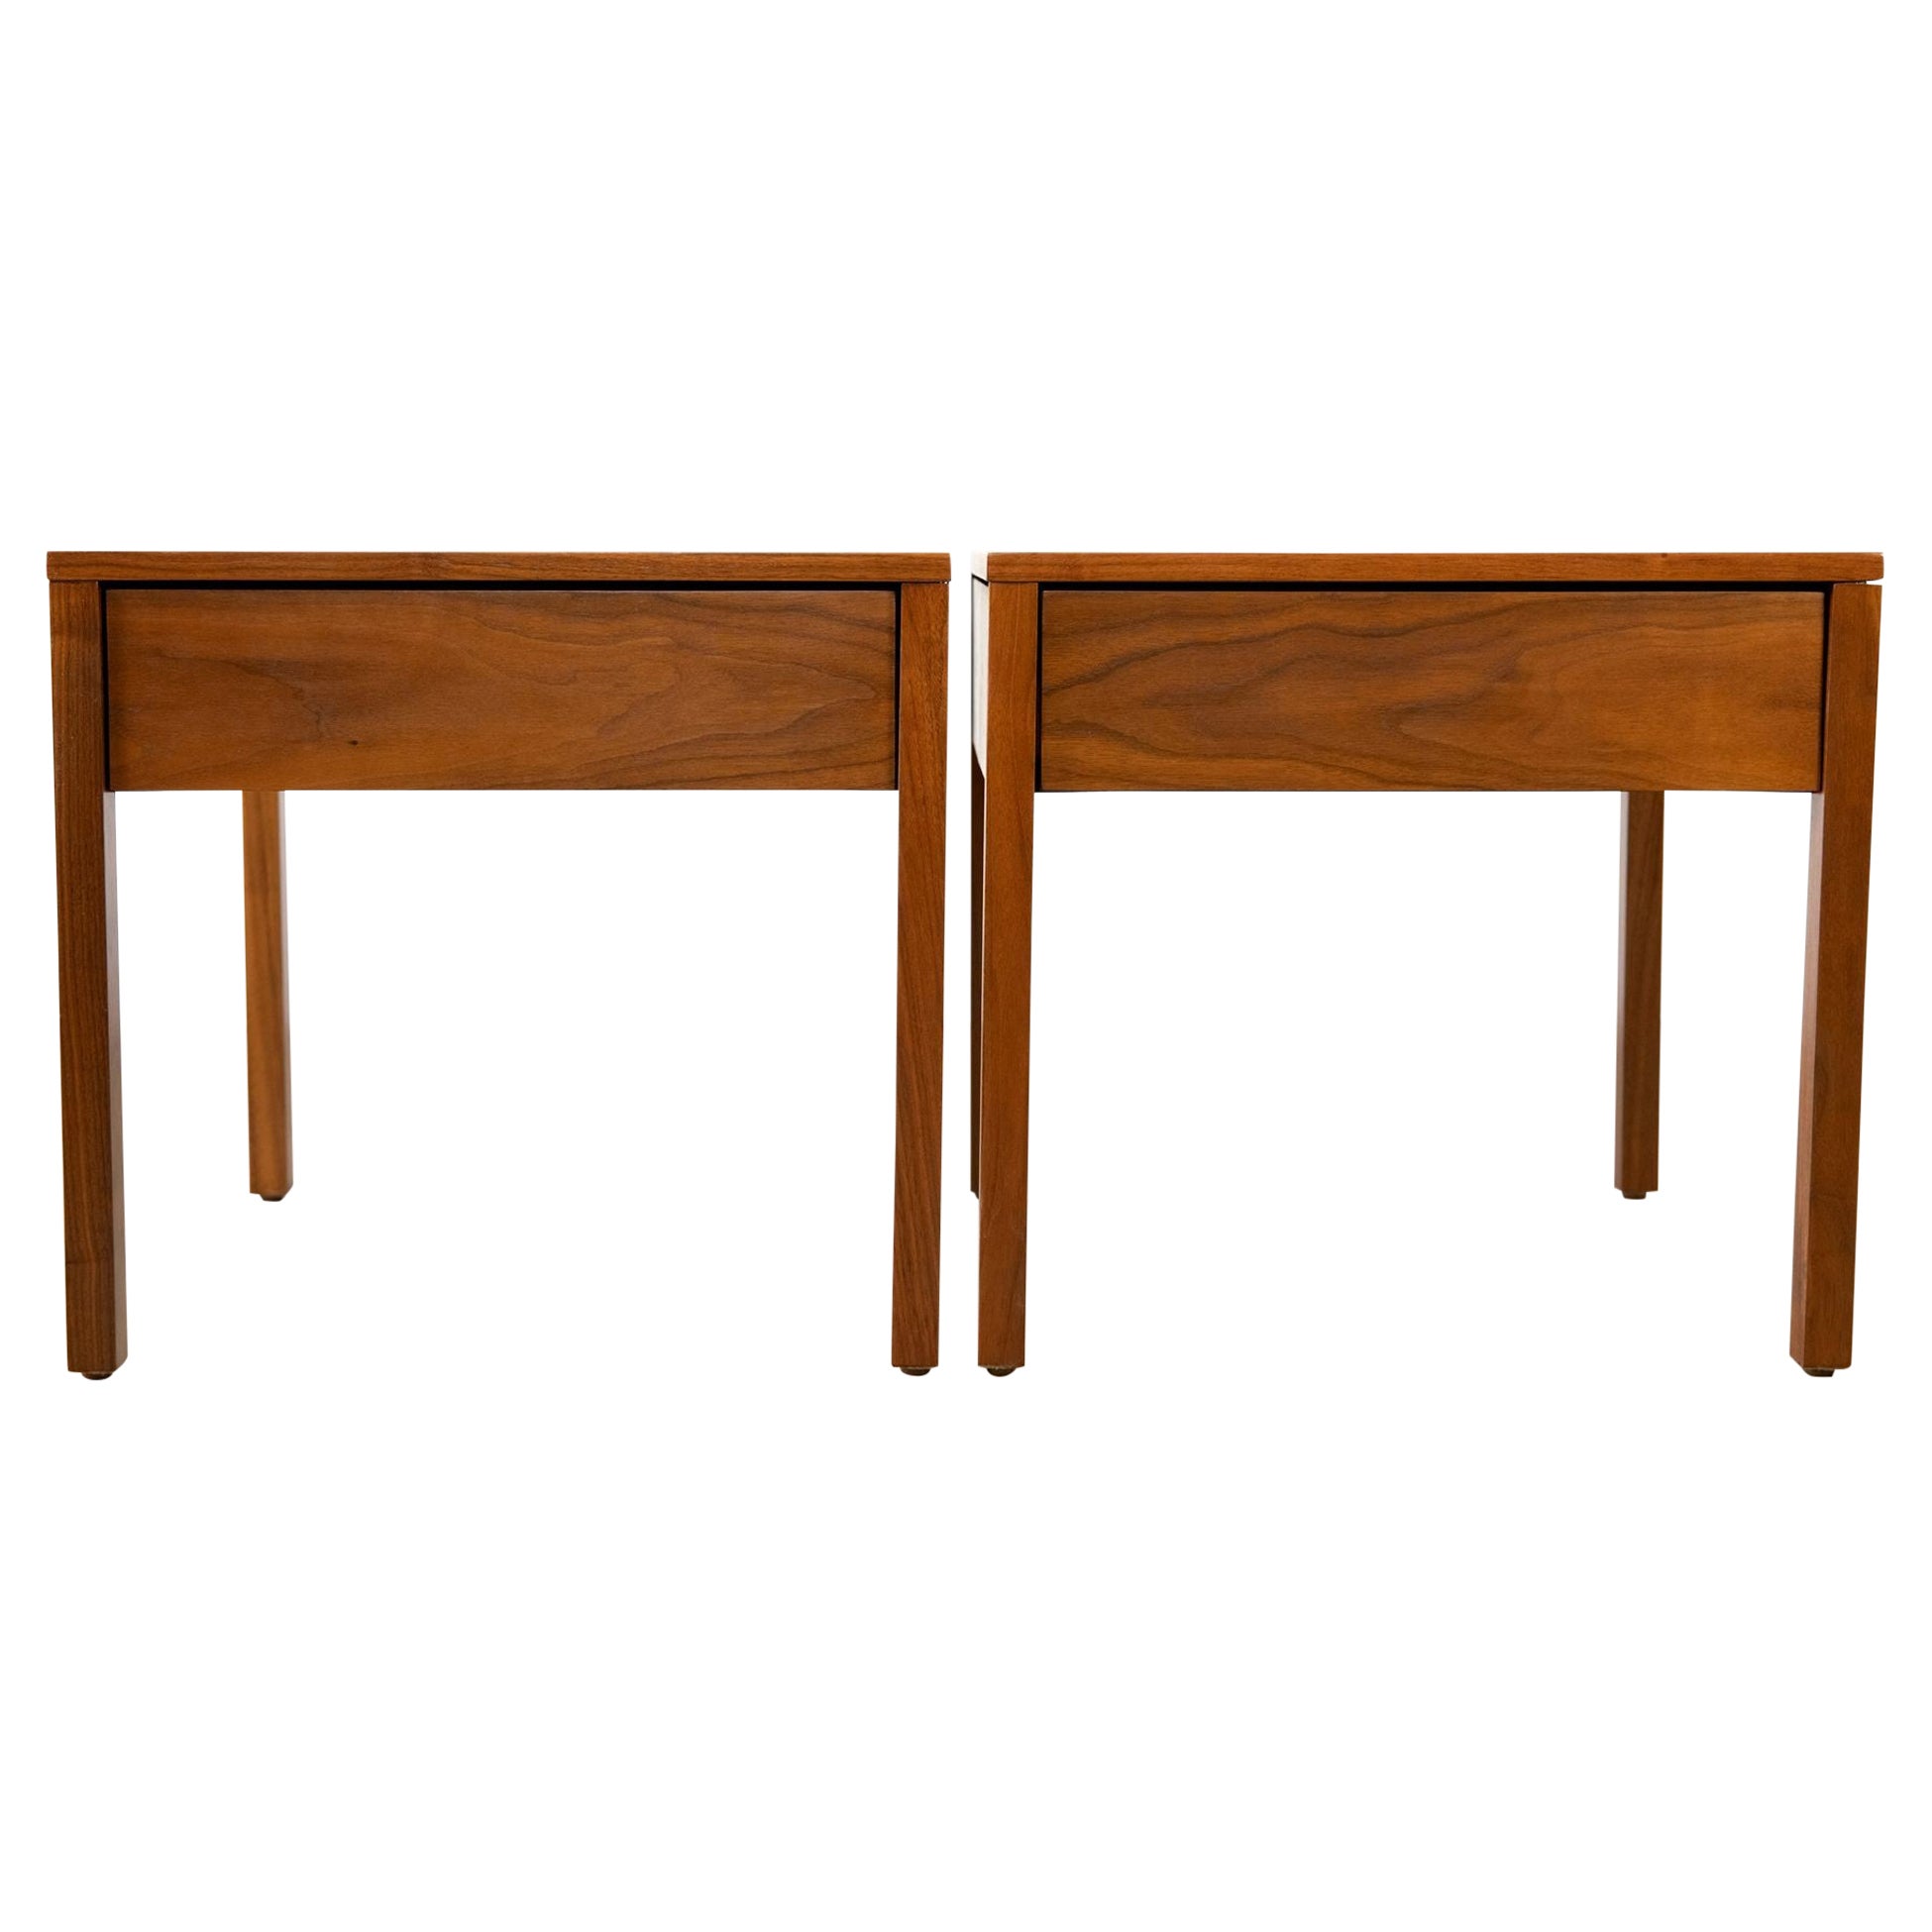 Florence Knoll Nightstands in Walnut for Knoll Associates Early Production For Sale